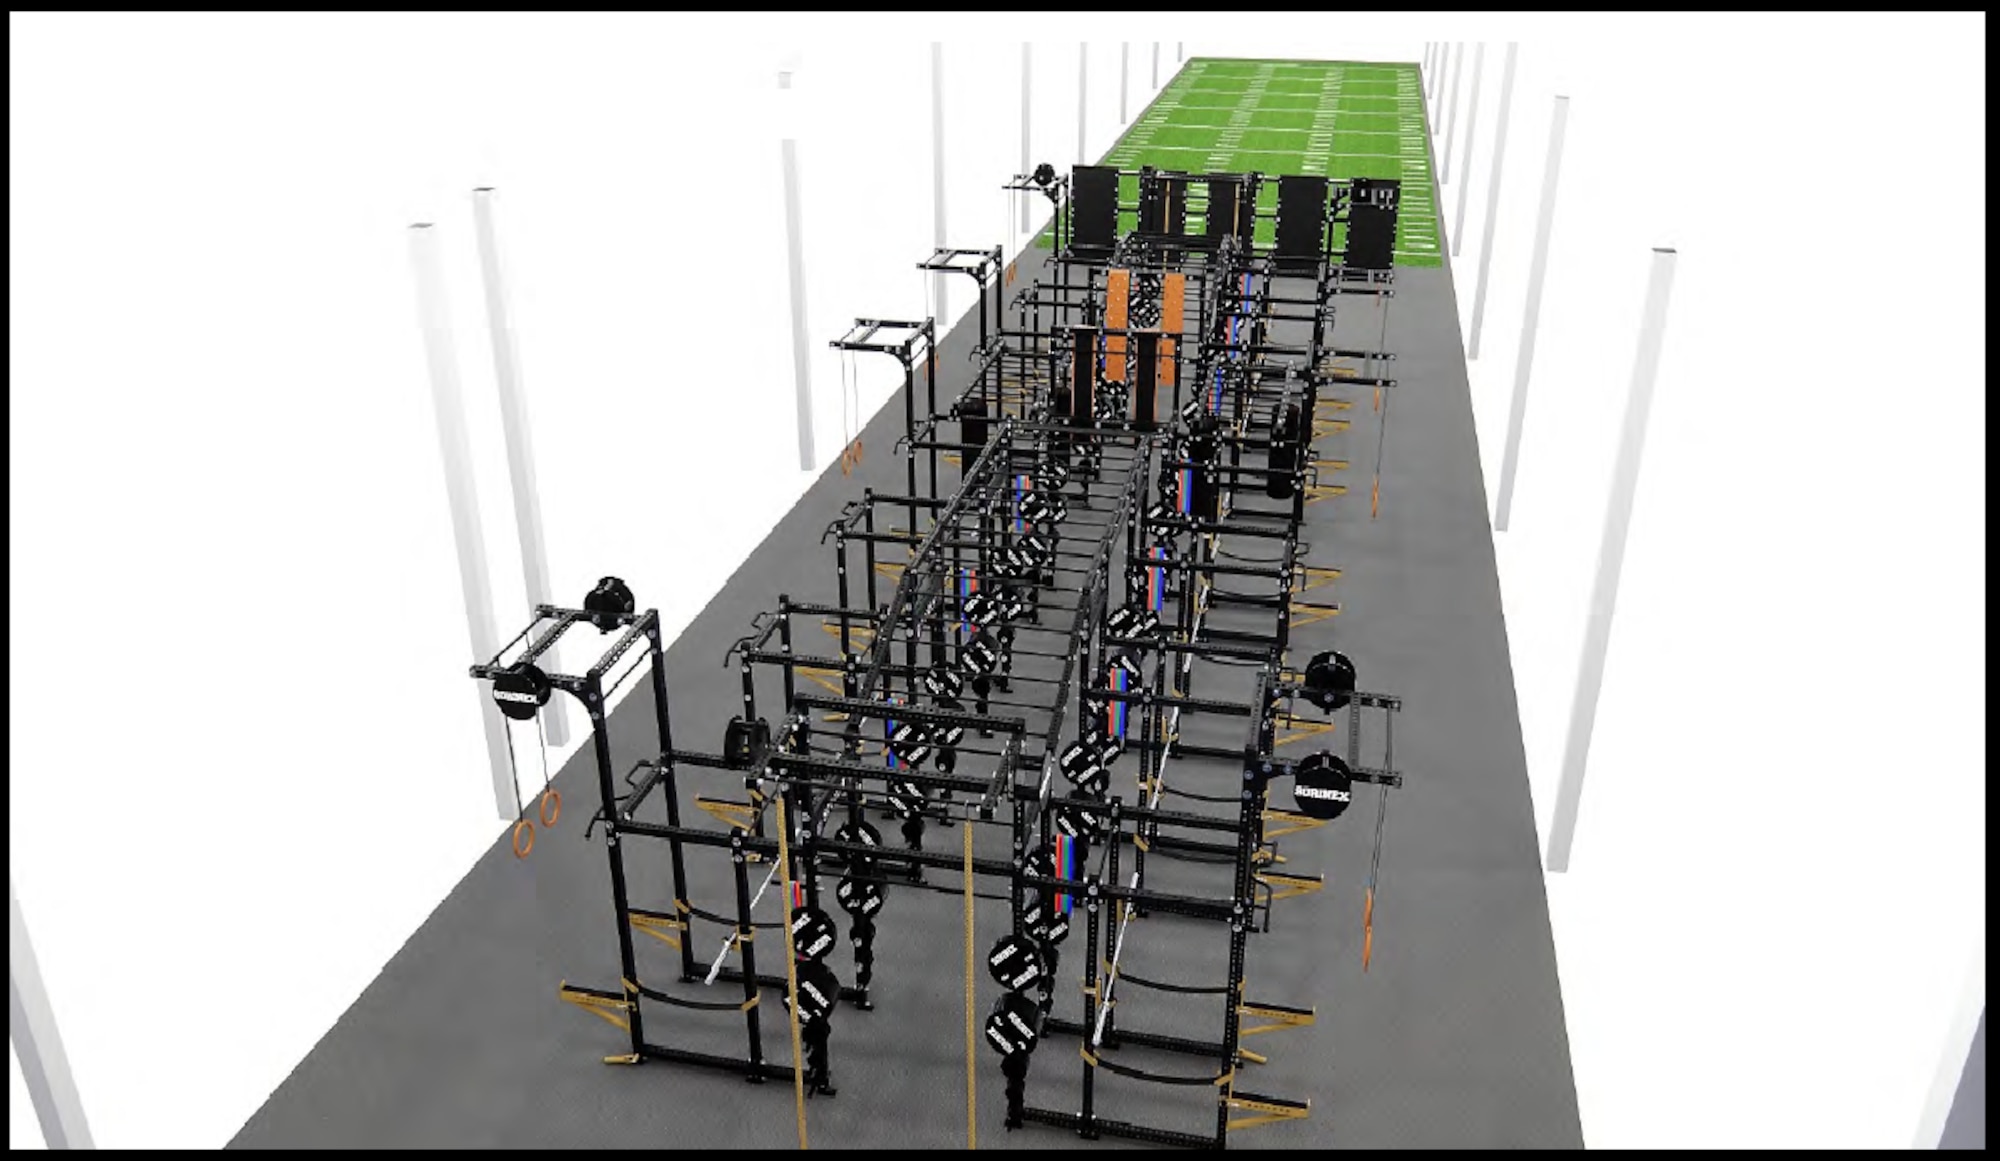 A rendered image depicting what U.S. Special Operations Command Central’s new human performance outdoor facility at MacDill Air Force Base, Tampa, Florida, will look like when additional fitness equipment is added. The facility is 247 feet long, 36 feet wide—130 feet of the flooring is made of synthetic turf, and the rest is made of rubber matting for the equipment workout area.